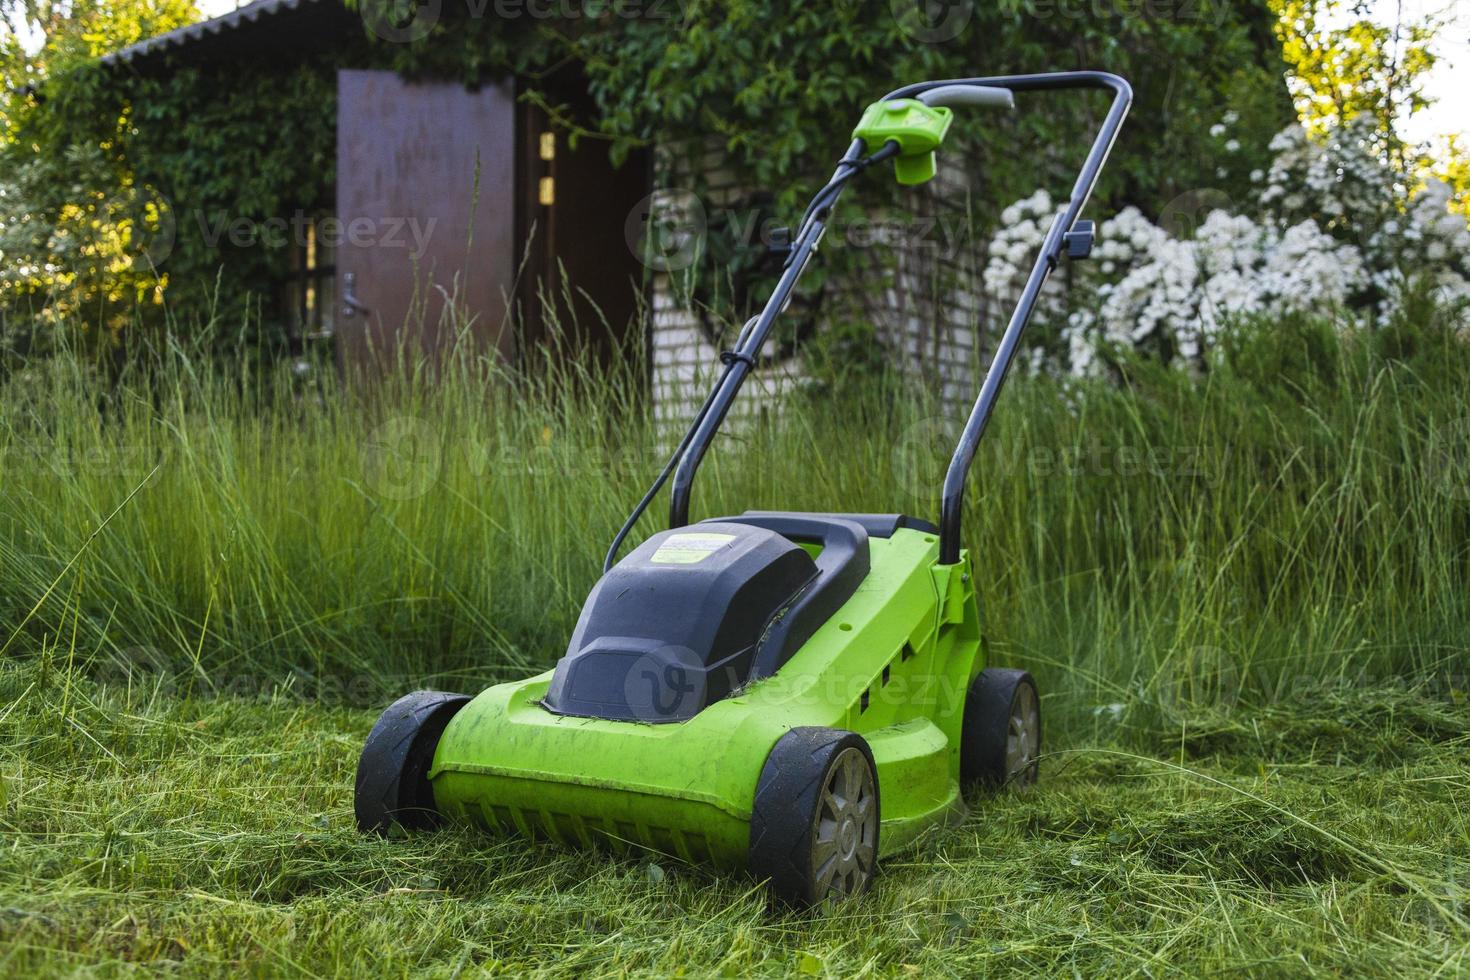 lawn mower on the grass, lawn care, mowing the grass, country cares, lawn mowing with an electric lawn mower photo